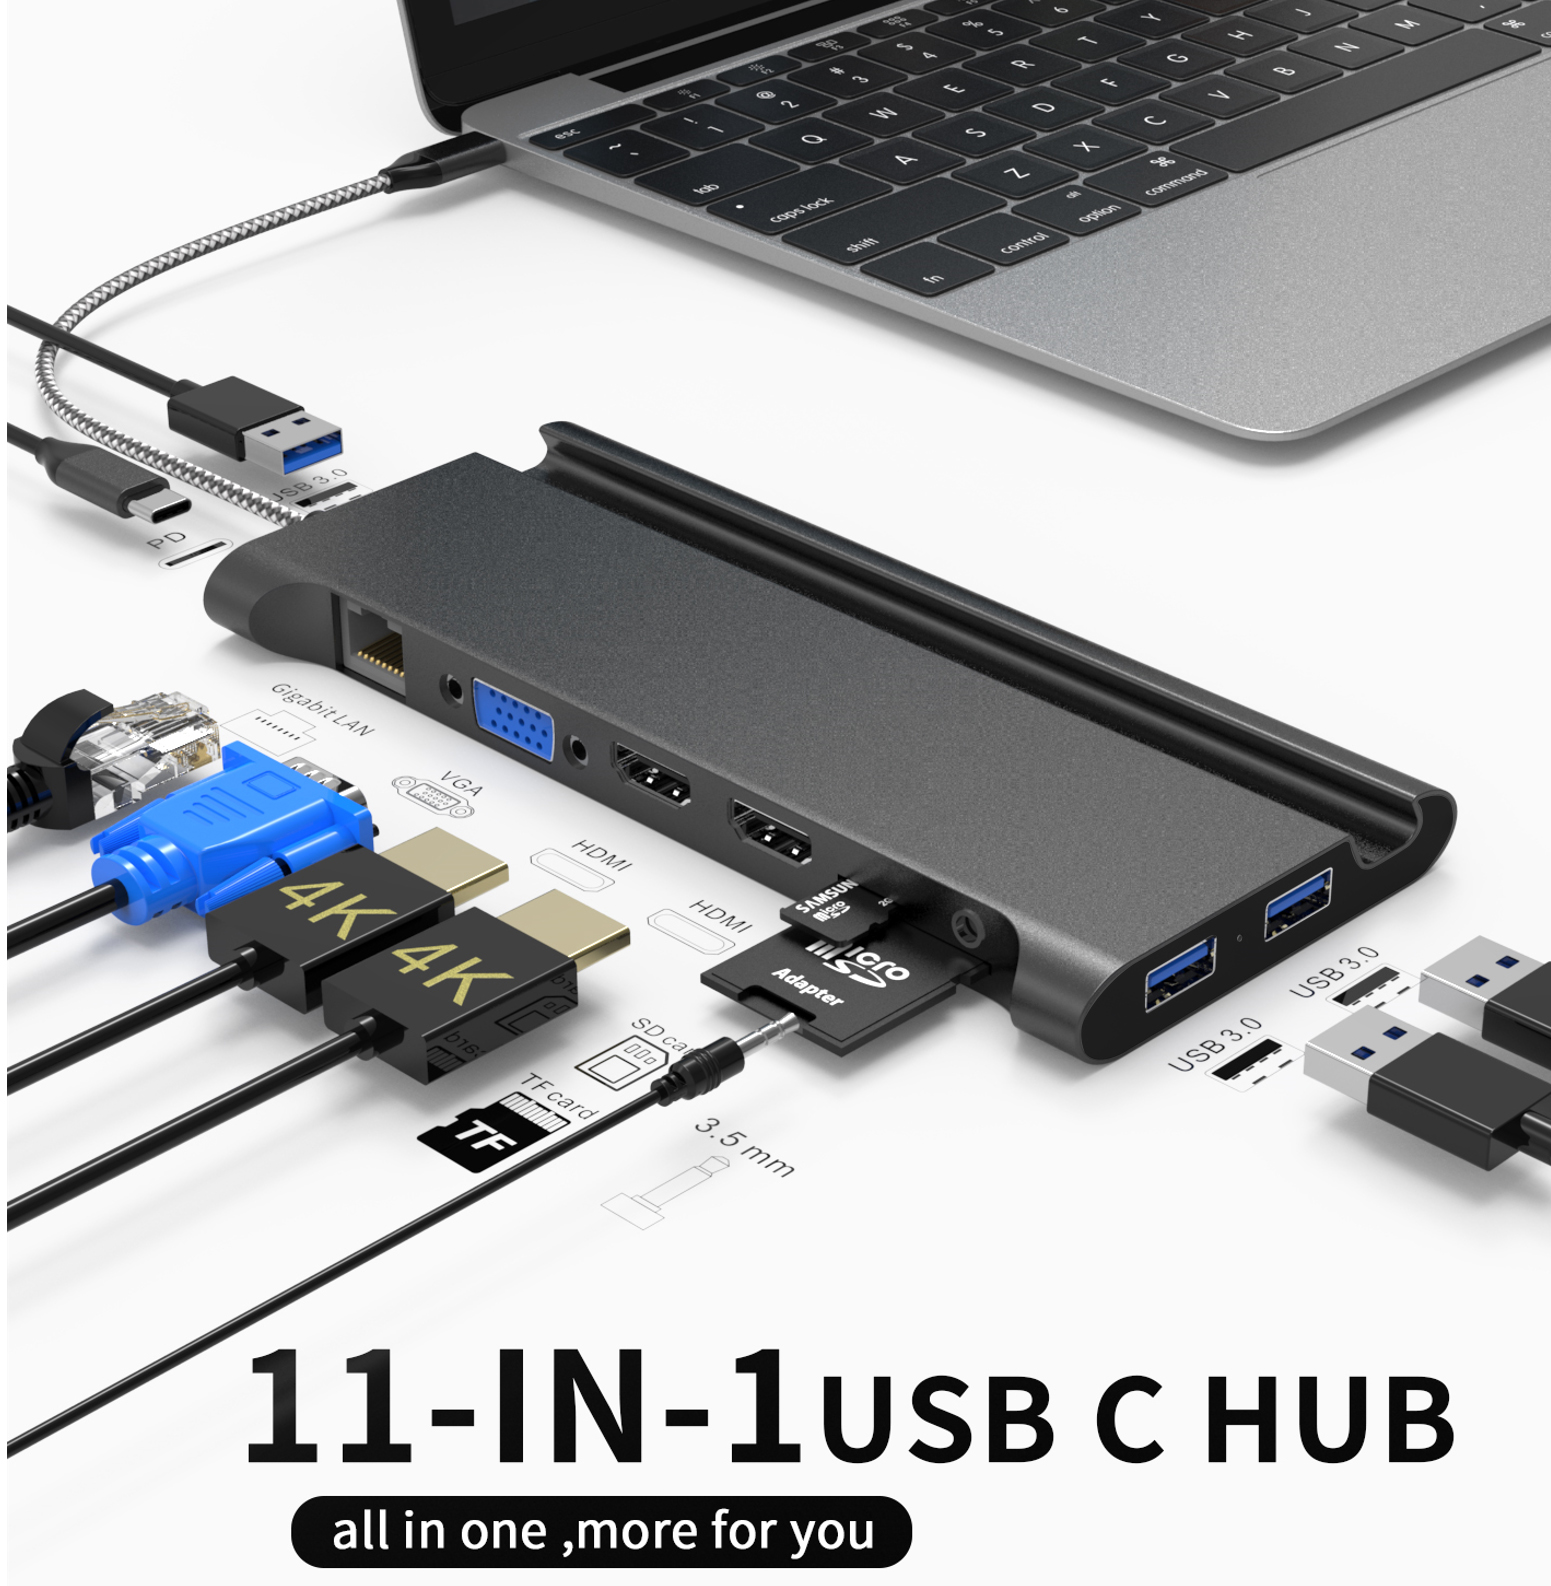 11 IN 1 usb c hub with 2 x HDMI 4K 30HZ+ VGA + Type C PD 100W Data + RJ45 + 3 x USB A 3.0 + 3.5mm Audio/Mic + SD + TF card reader multi port docking station for laptop/phone